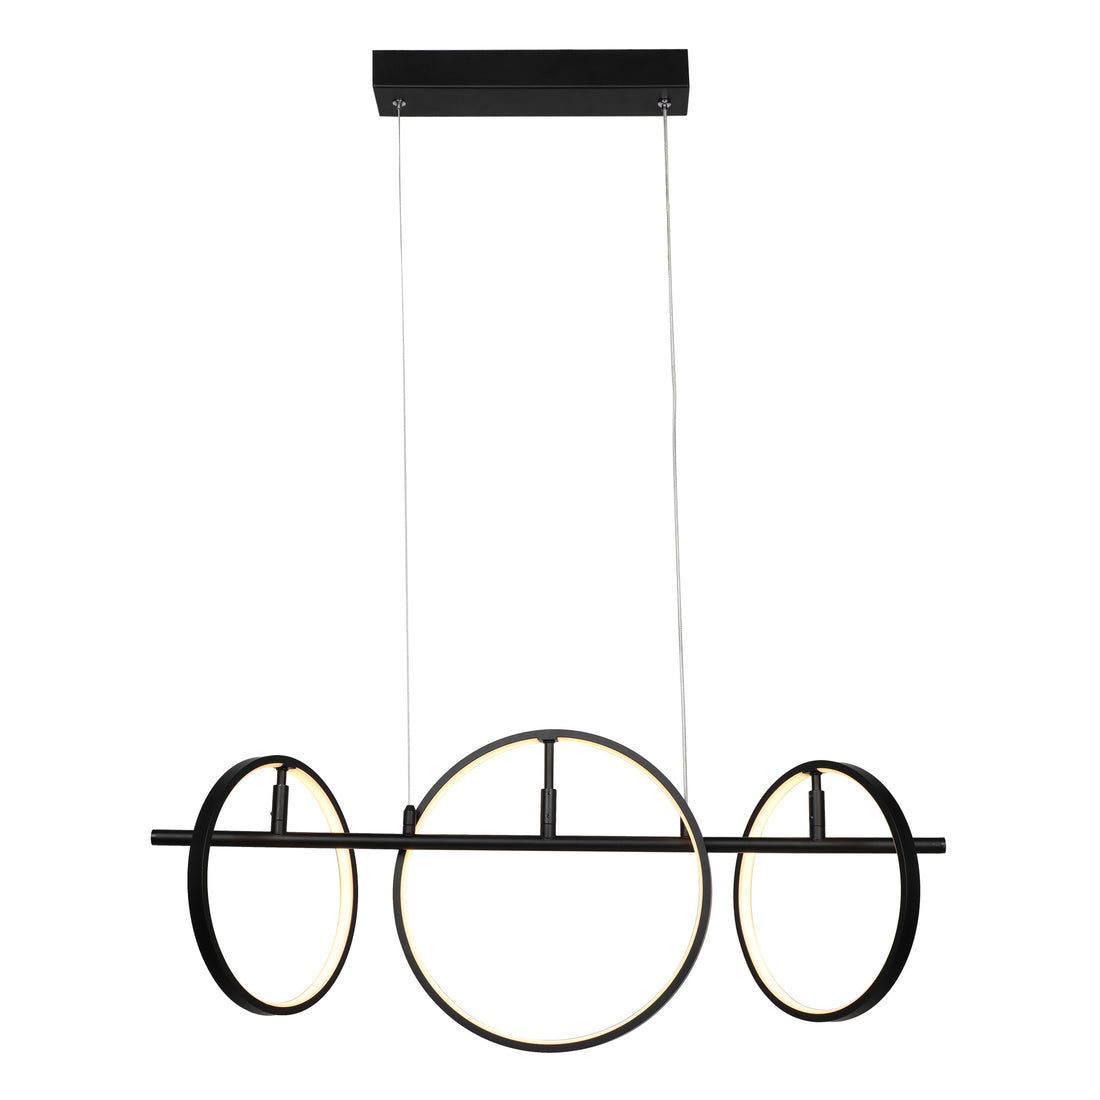 Smafan Abbey Modern Creative LED Chandelier Pendant Light,this black 3 light LED hanginig light with geometric integrated into the design,using simple circles to outline the most spiritual space,everywhere has a simple and extraordinary fashion sense.It is a good decor to your house by this circle pendant light fixture.It comes with two different sizes of circles to make a simple and modern style,at the same time,without lack of aesthetics.